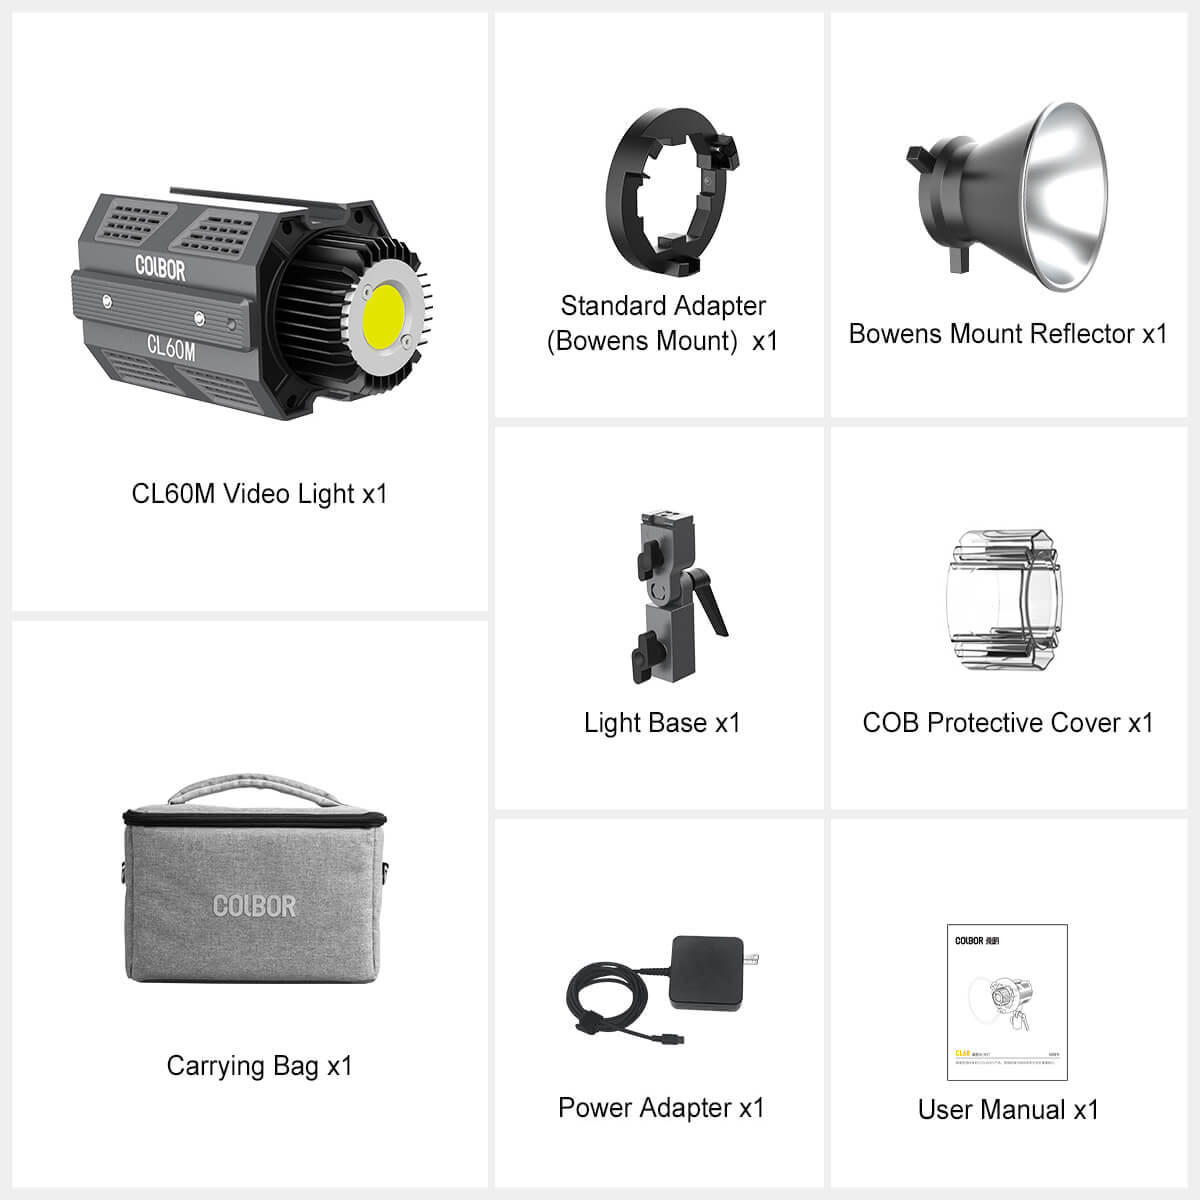 The best budget lighting kit for video mainly includes the COLBOR CL60M, a COB protective cover, a light base, a power adapter, etc.